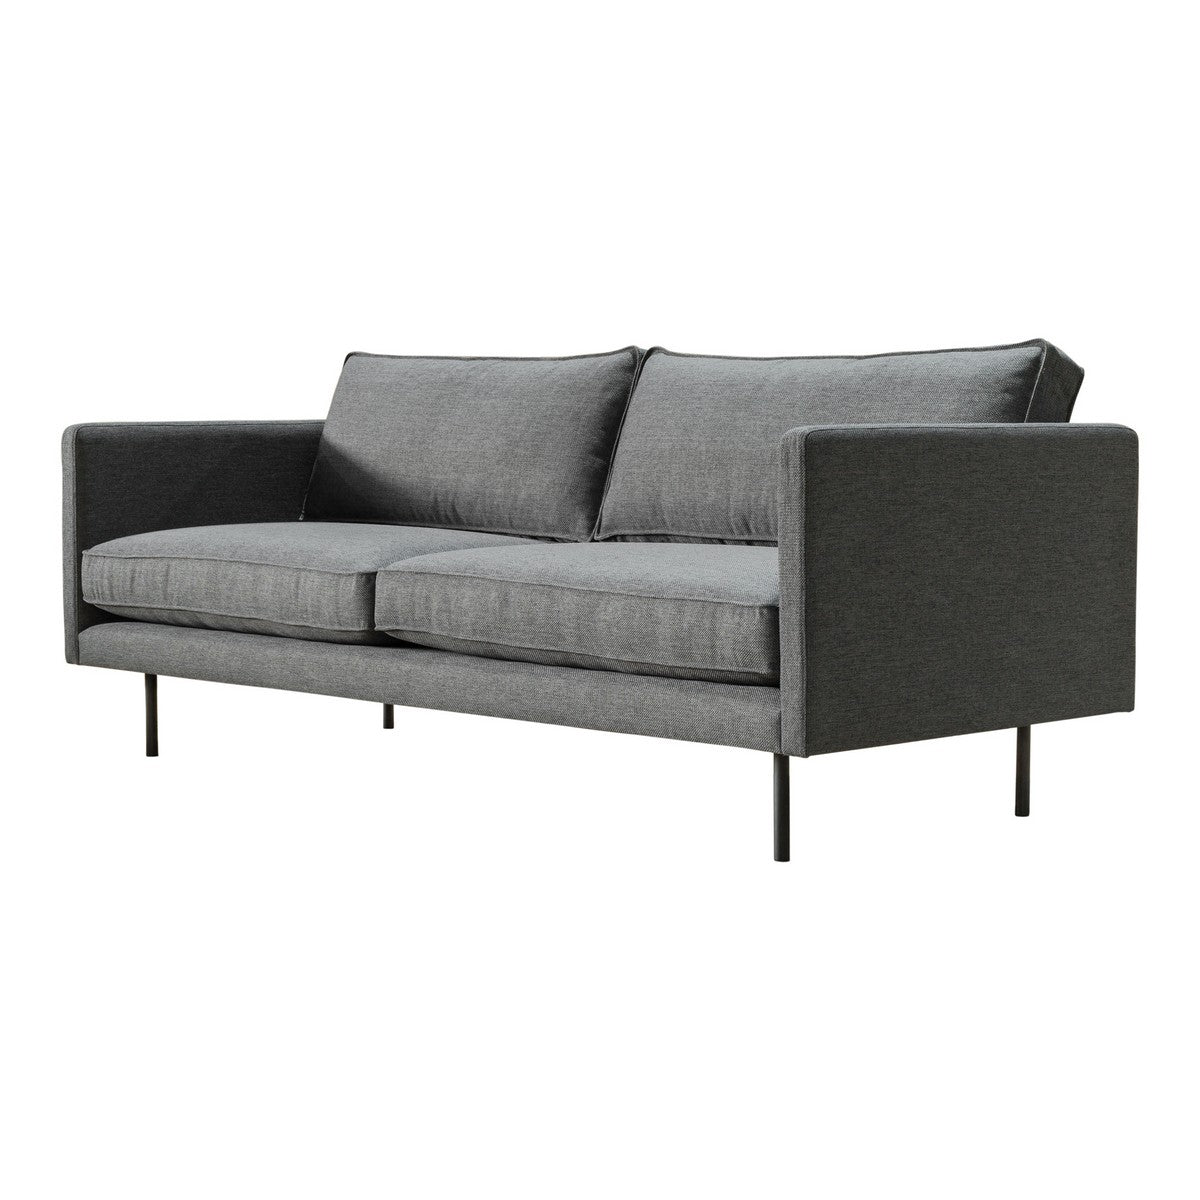 Moe's Home Collection Raphael Sofa Anthracite - WB-1002-07